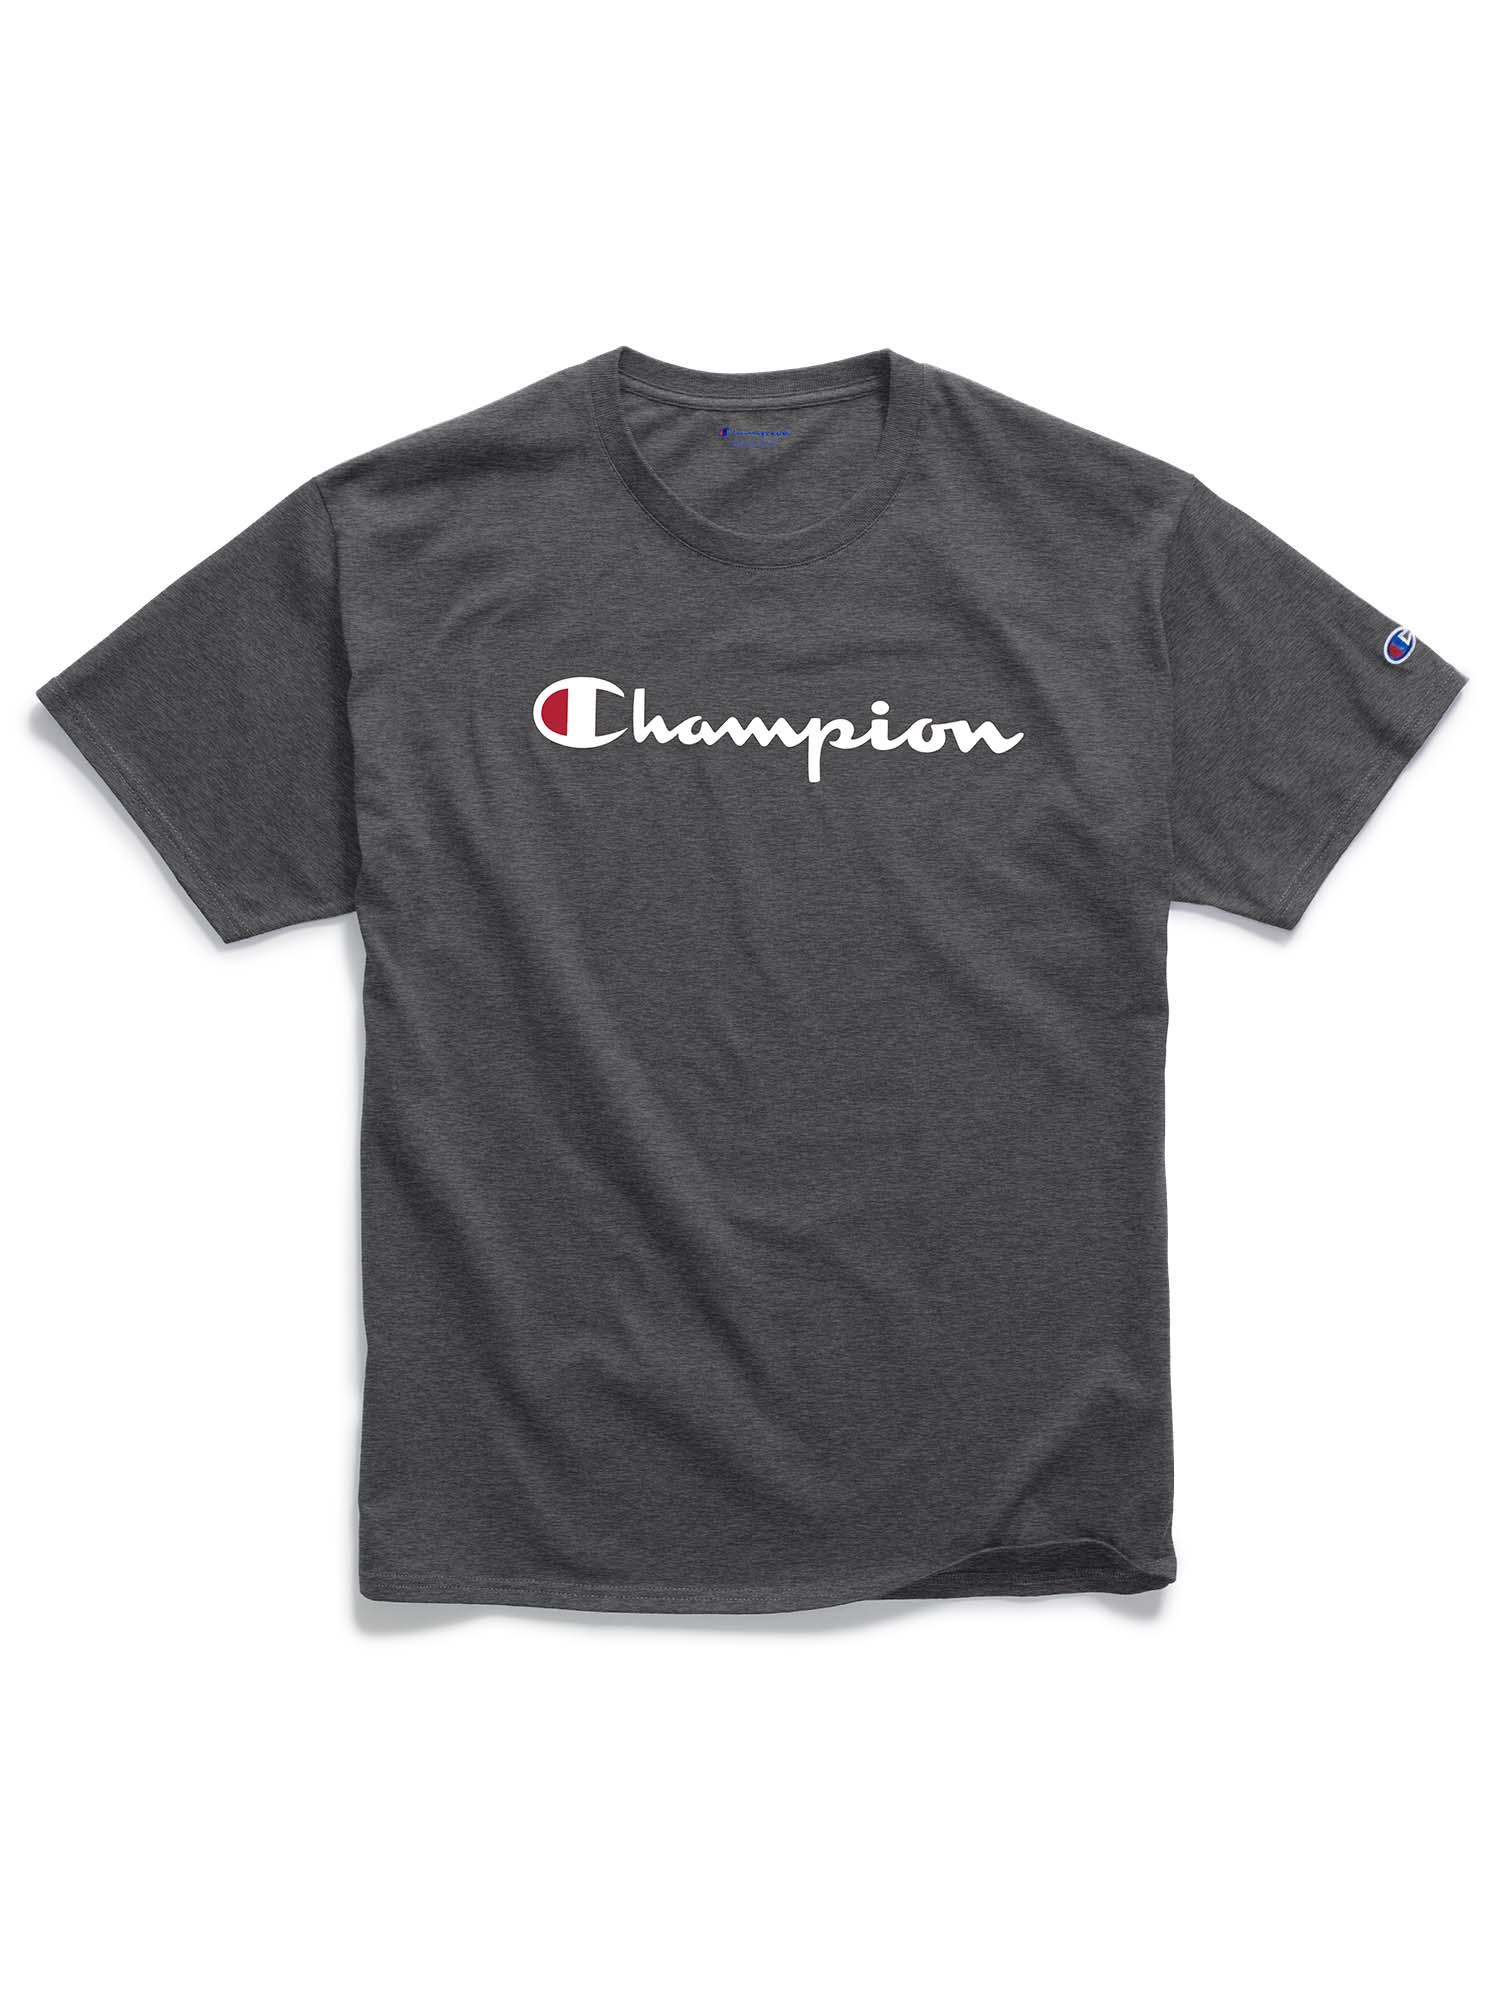 Champion Men's and Big Men's Script Logo Classic Jersey Graphic Tee Shirt, Sizes S-2XL - image 5 of 8